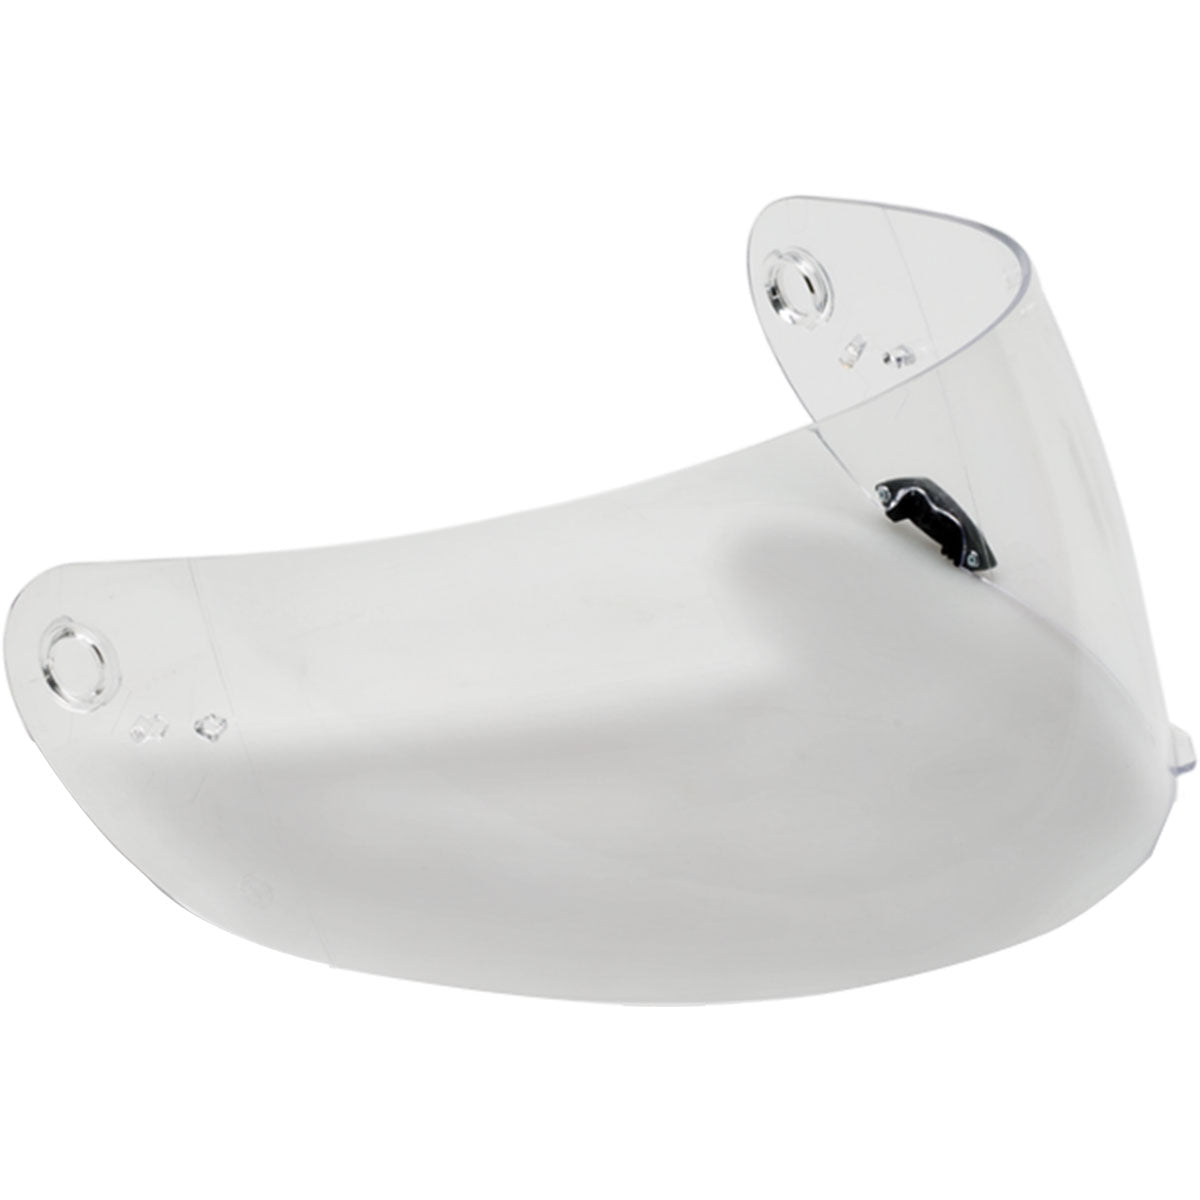 Bell Click Release Face Shield Helmet Accessories-2010057